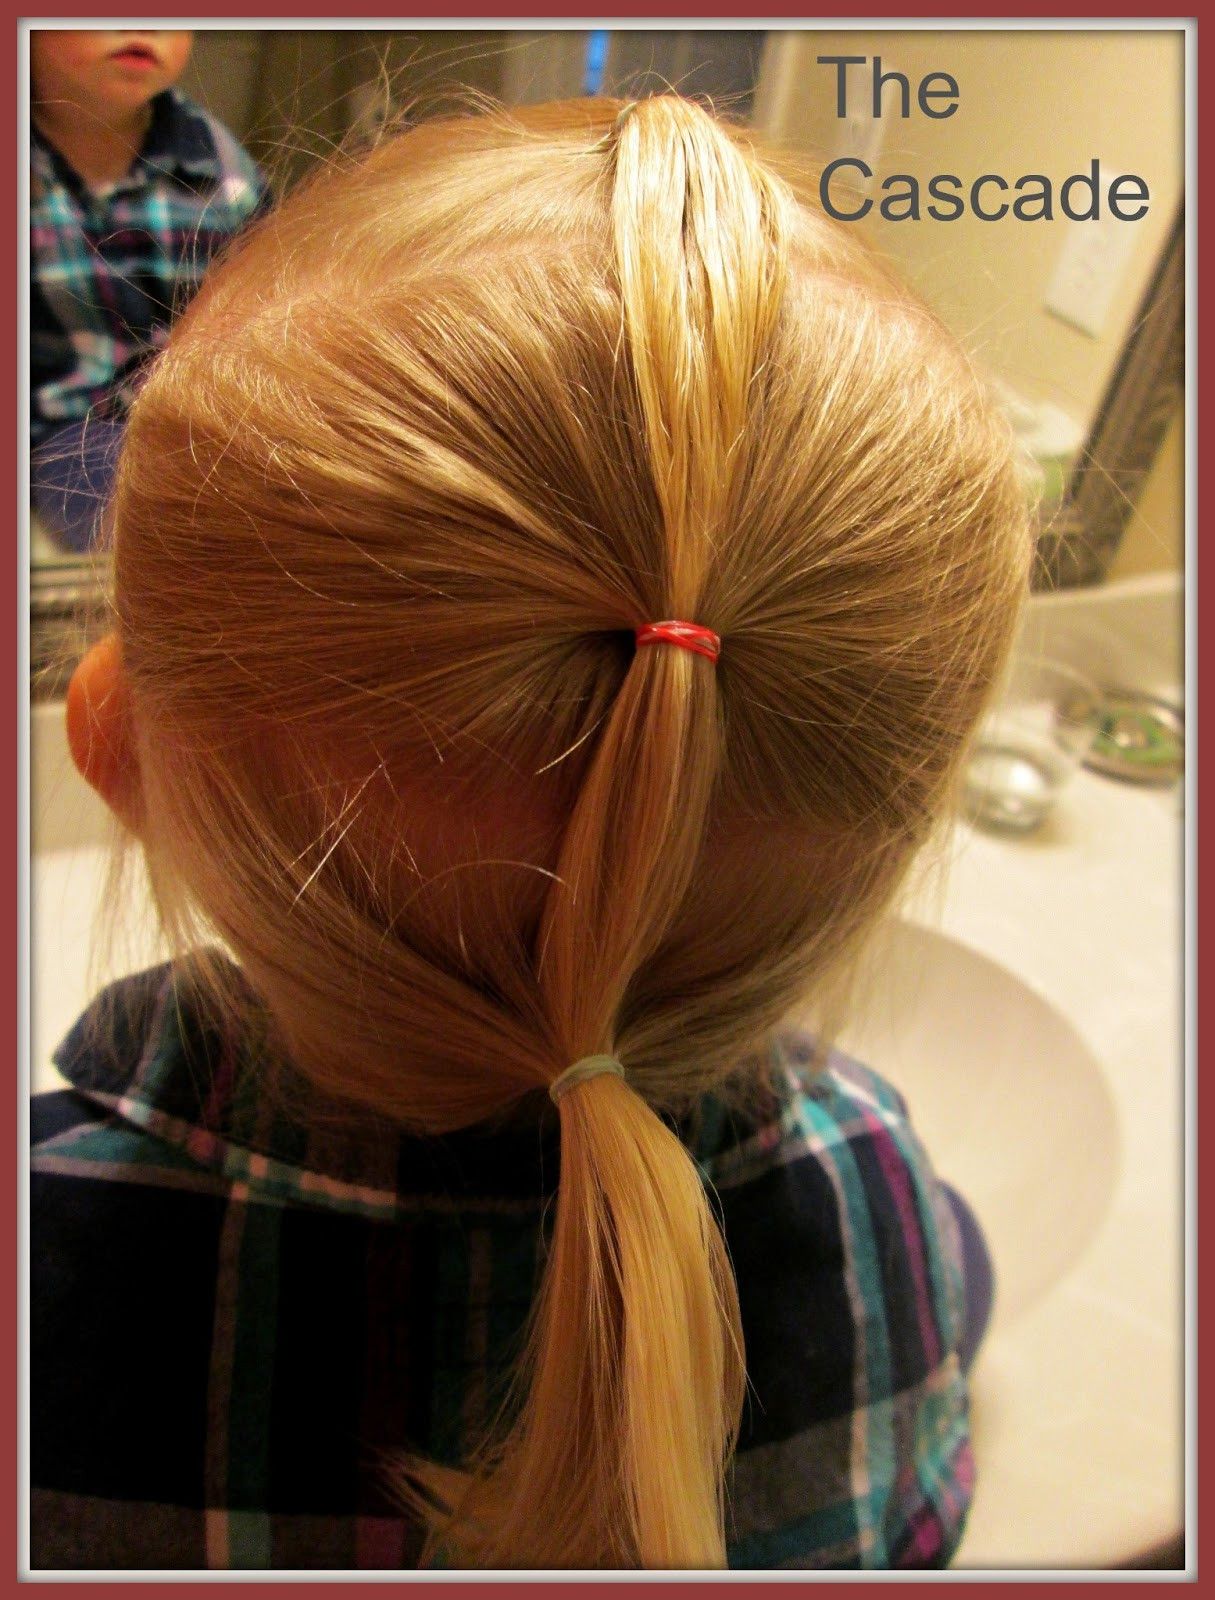 10 Easy Hairstyles
 THE REHOMESTEADERS 10 Easy Hairstyles for Little Girls